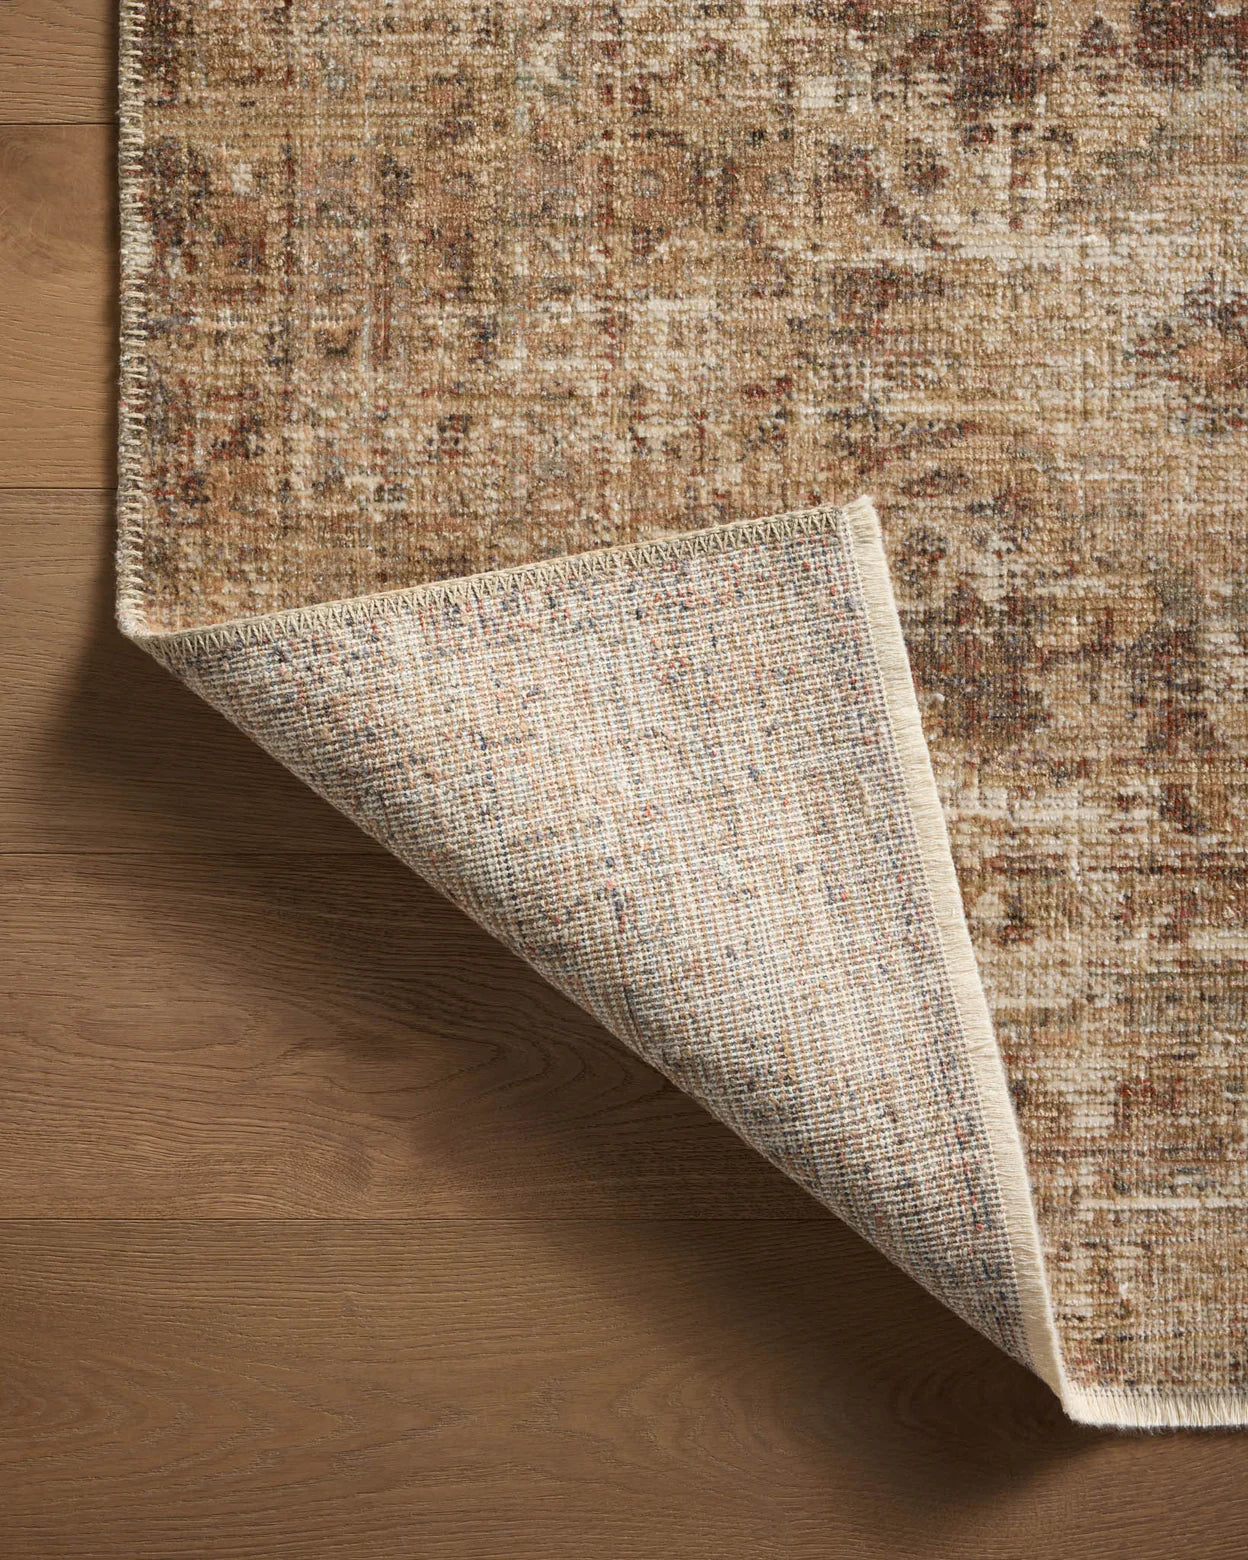 A close-up of a textured Loloi Rugs Bark / Multi Rug with warm, Arizona-inspired tones, partially rolled up to reveal its underside, on a wooden floor.